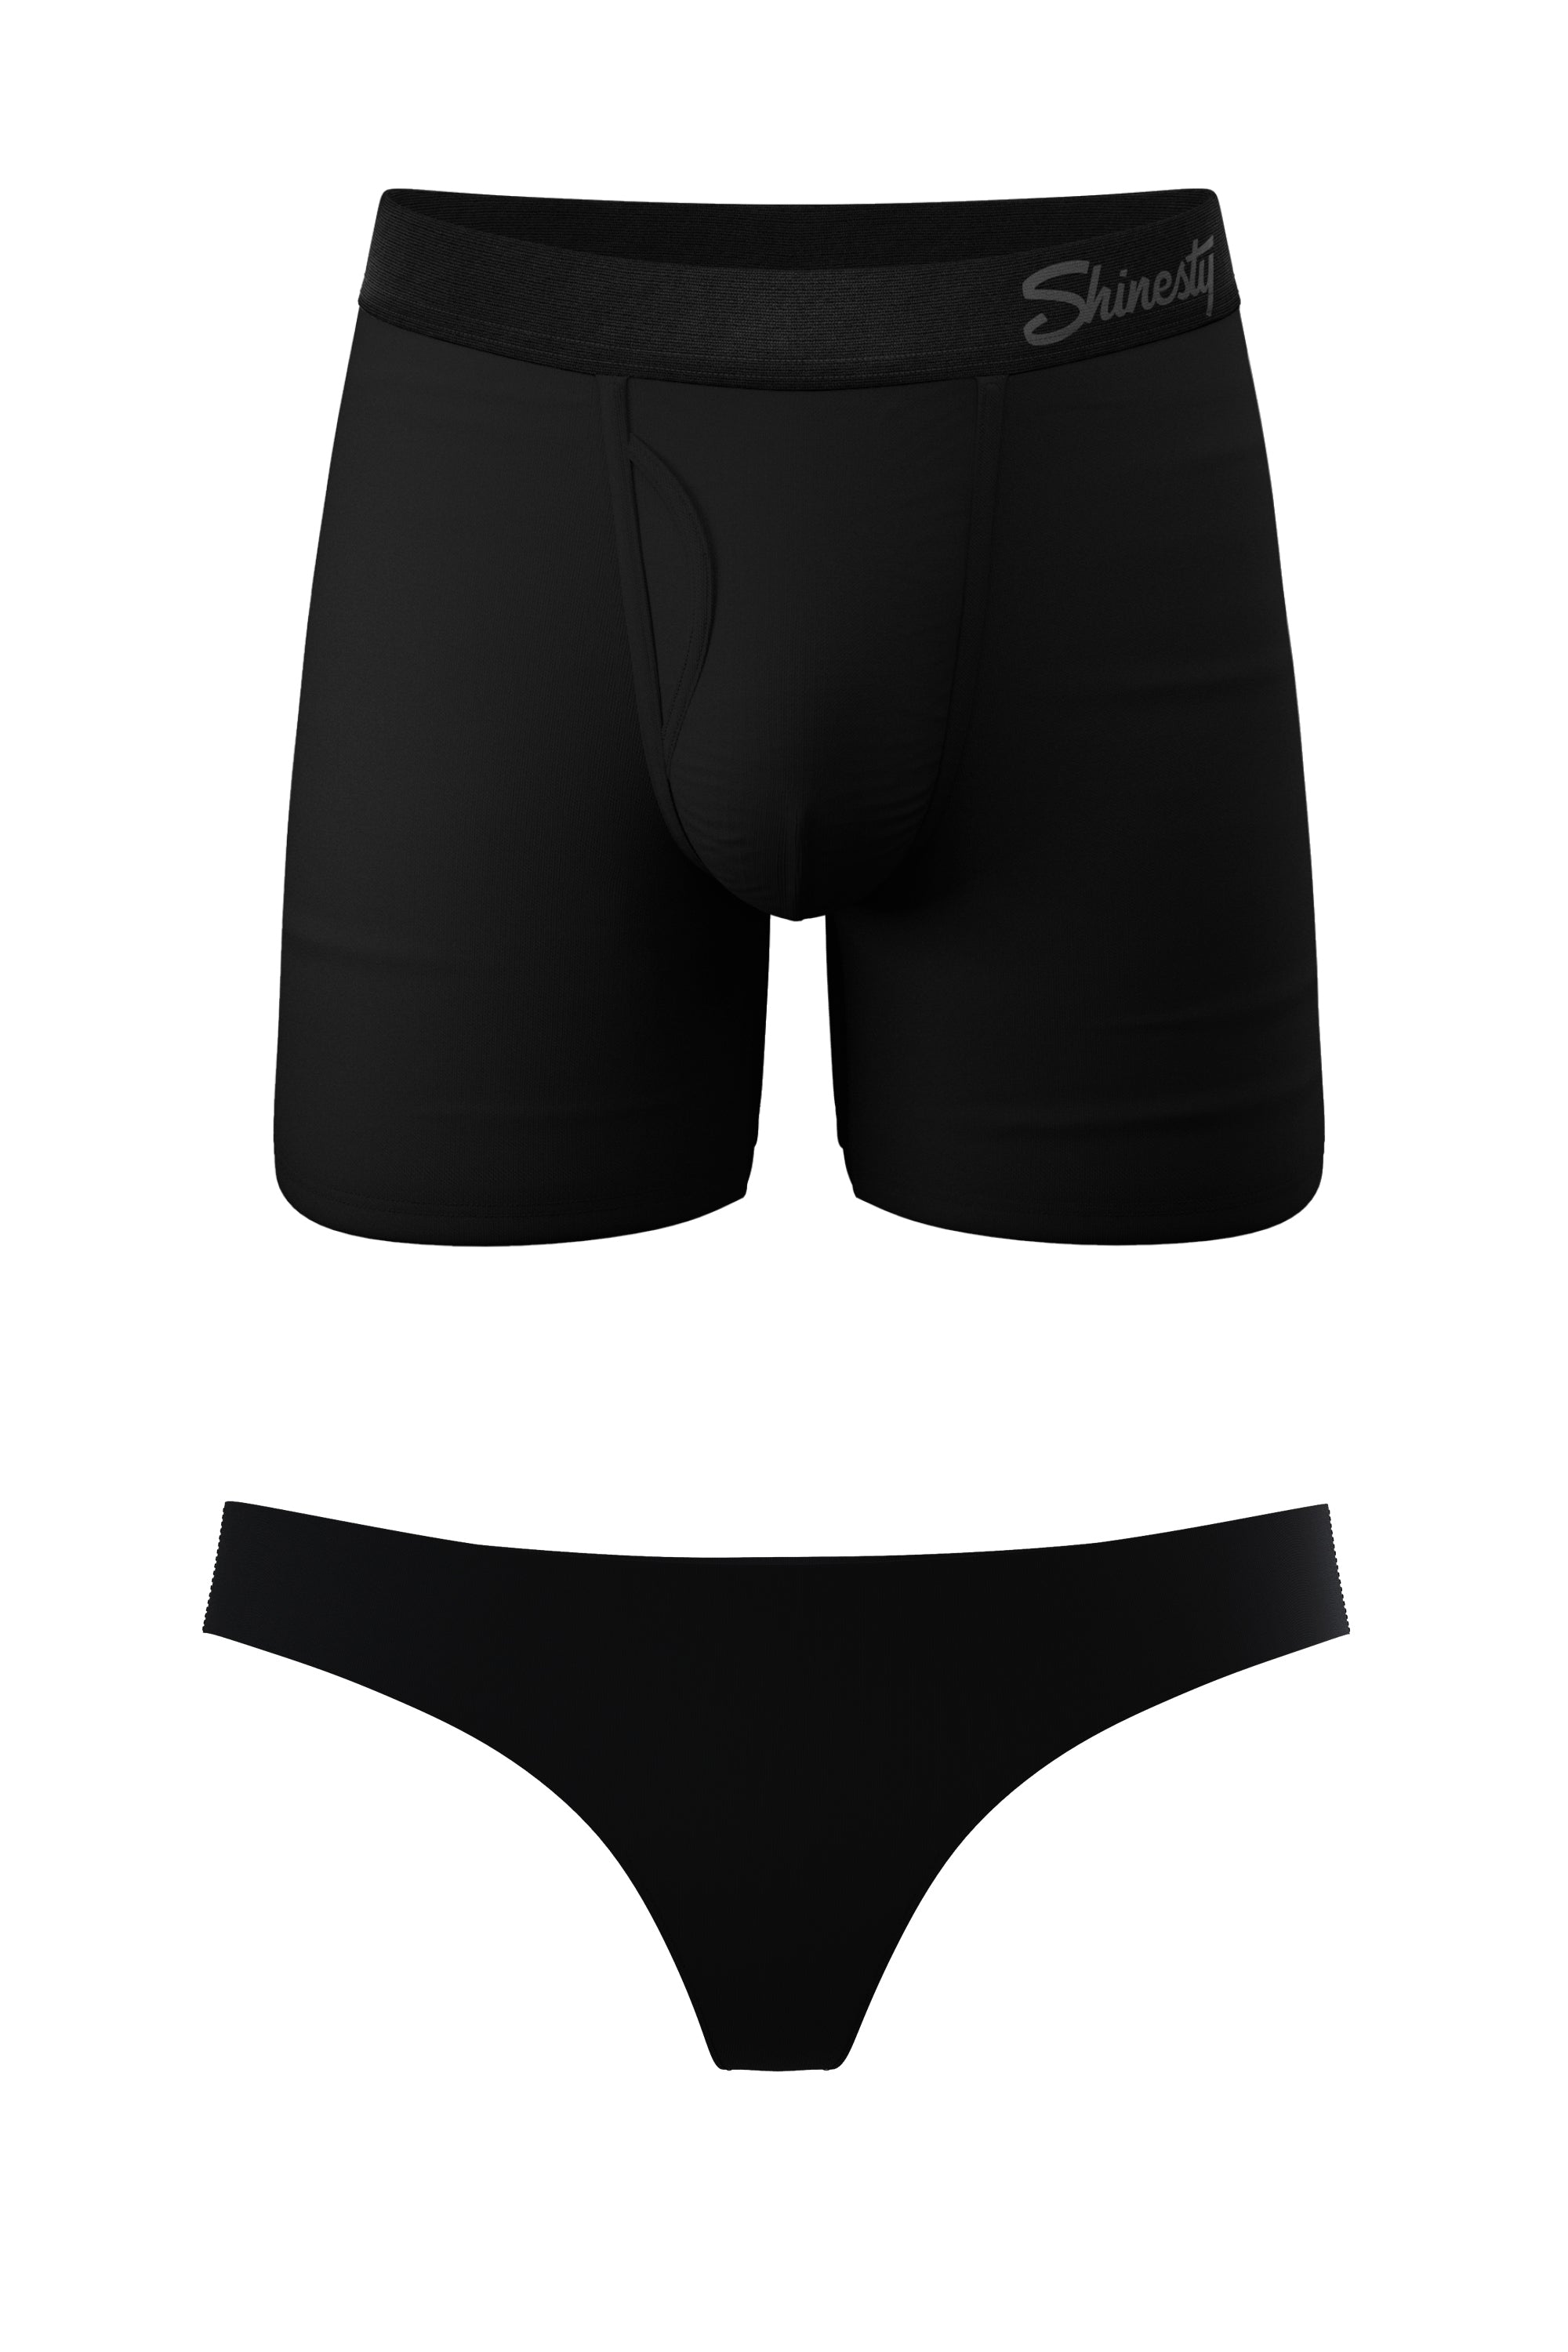 Solid Black Matching Couples Underwear 2 Pack